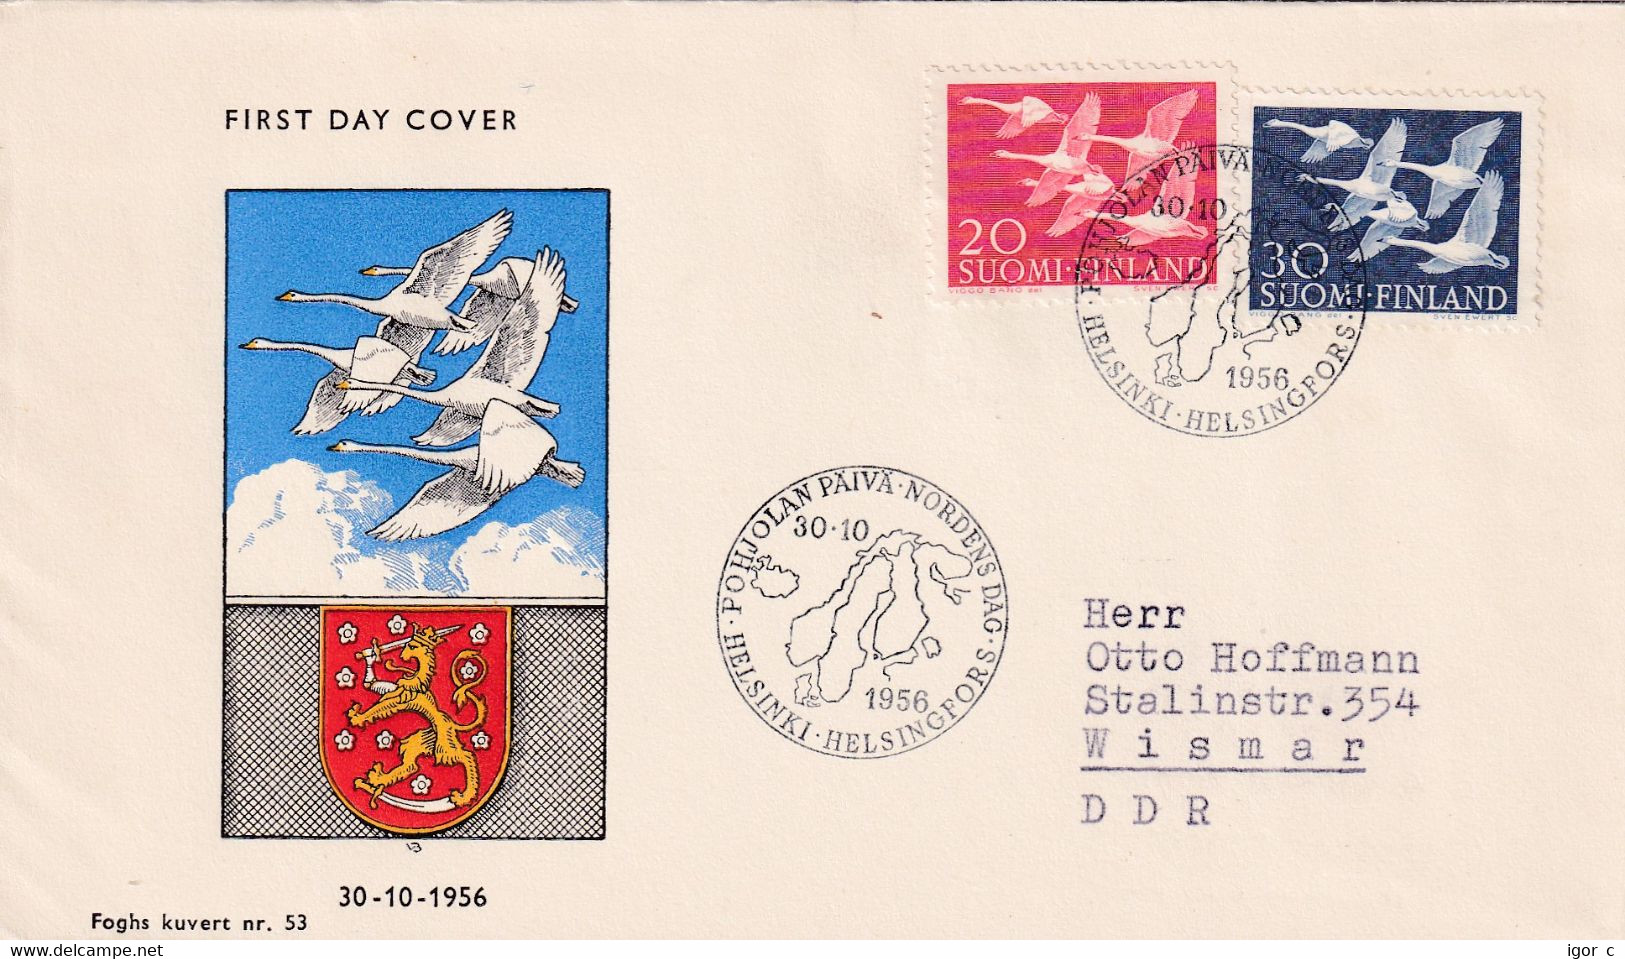 Finland 1956 Cover: OISEAUX VÖGEL - SWAN SCHWAN CYGNE CISNE; Nordic Countries Cooperation Day; Joint Issue; Lion Löwe - Cygnes